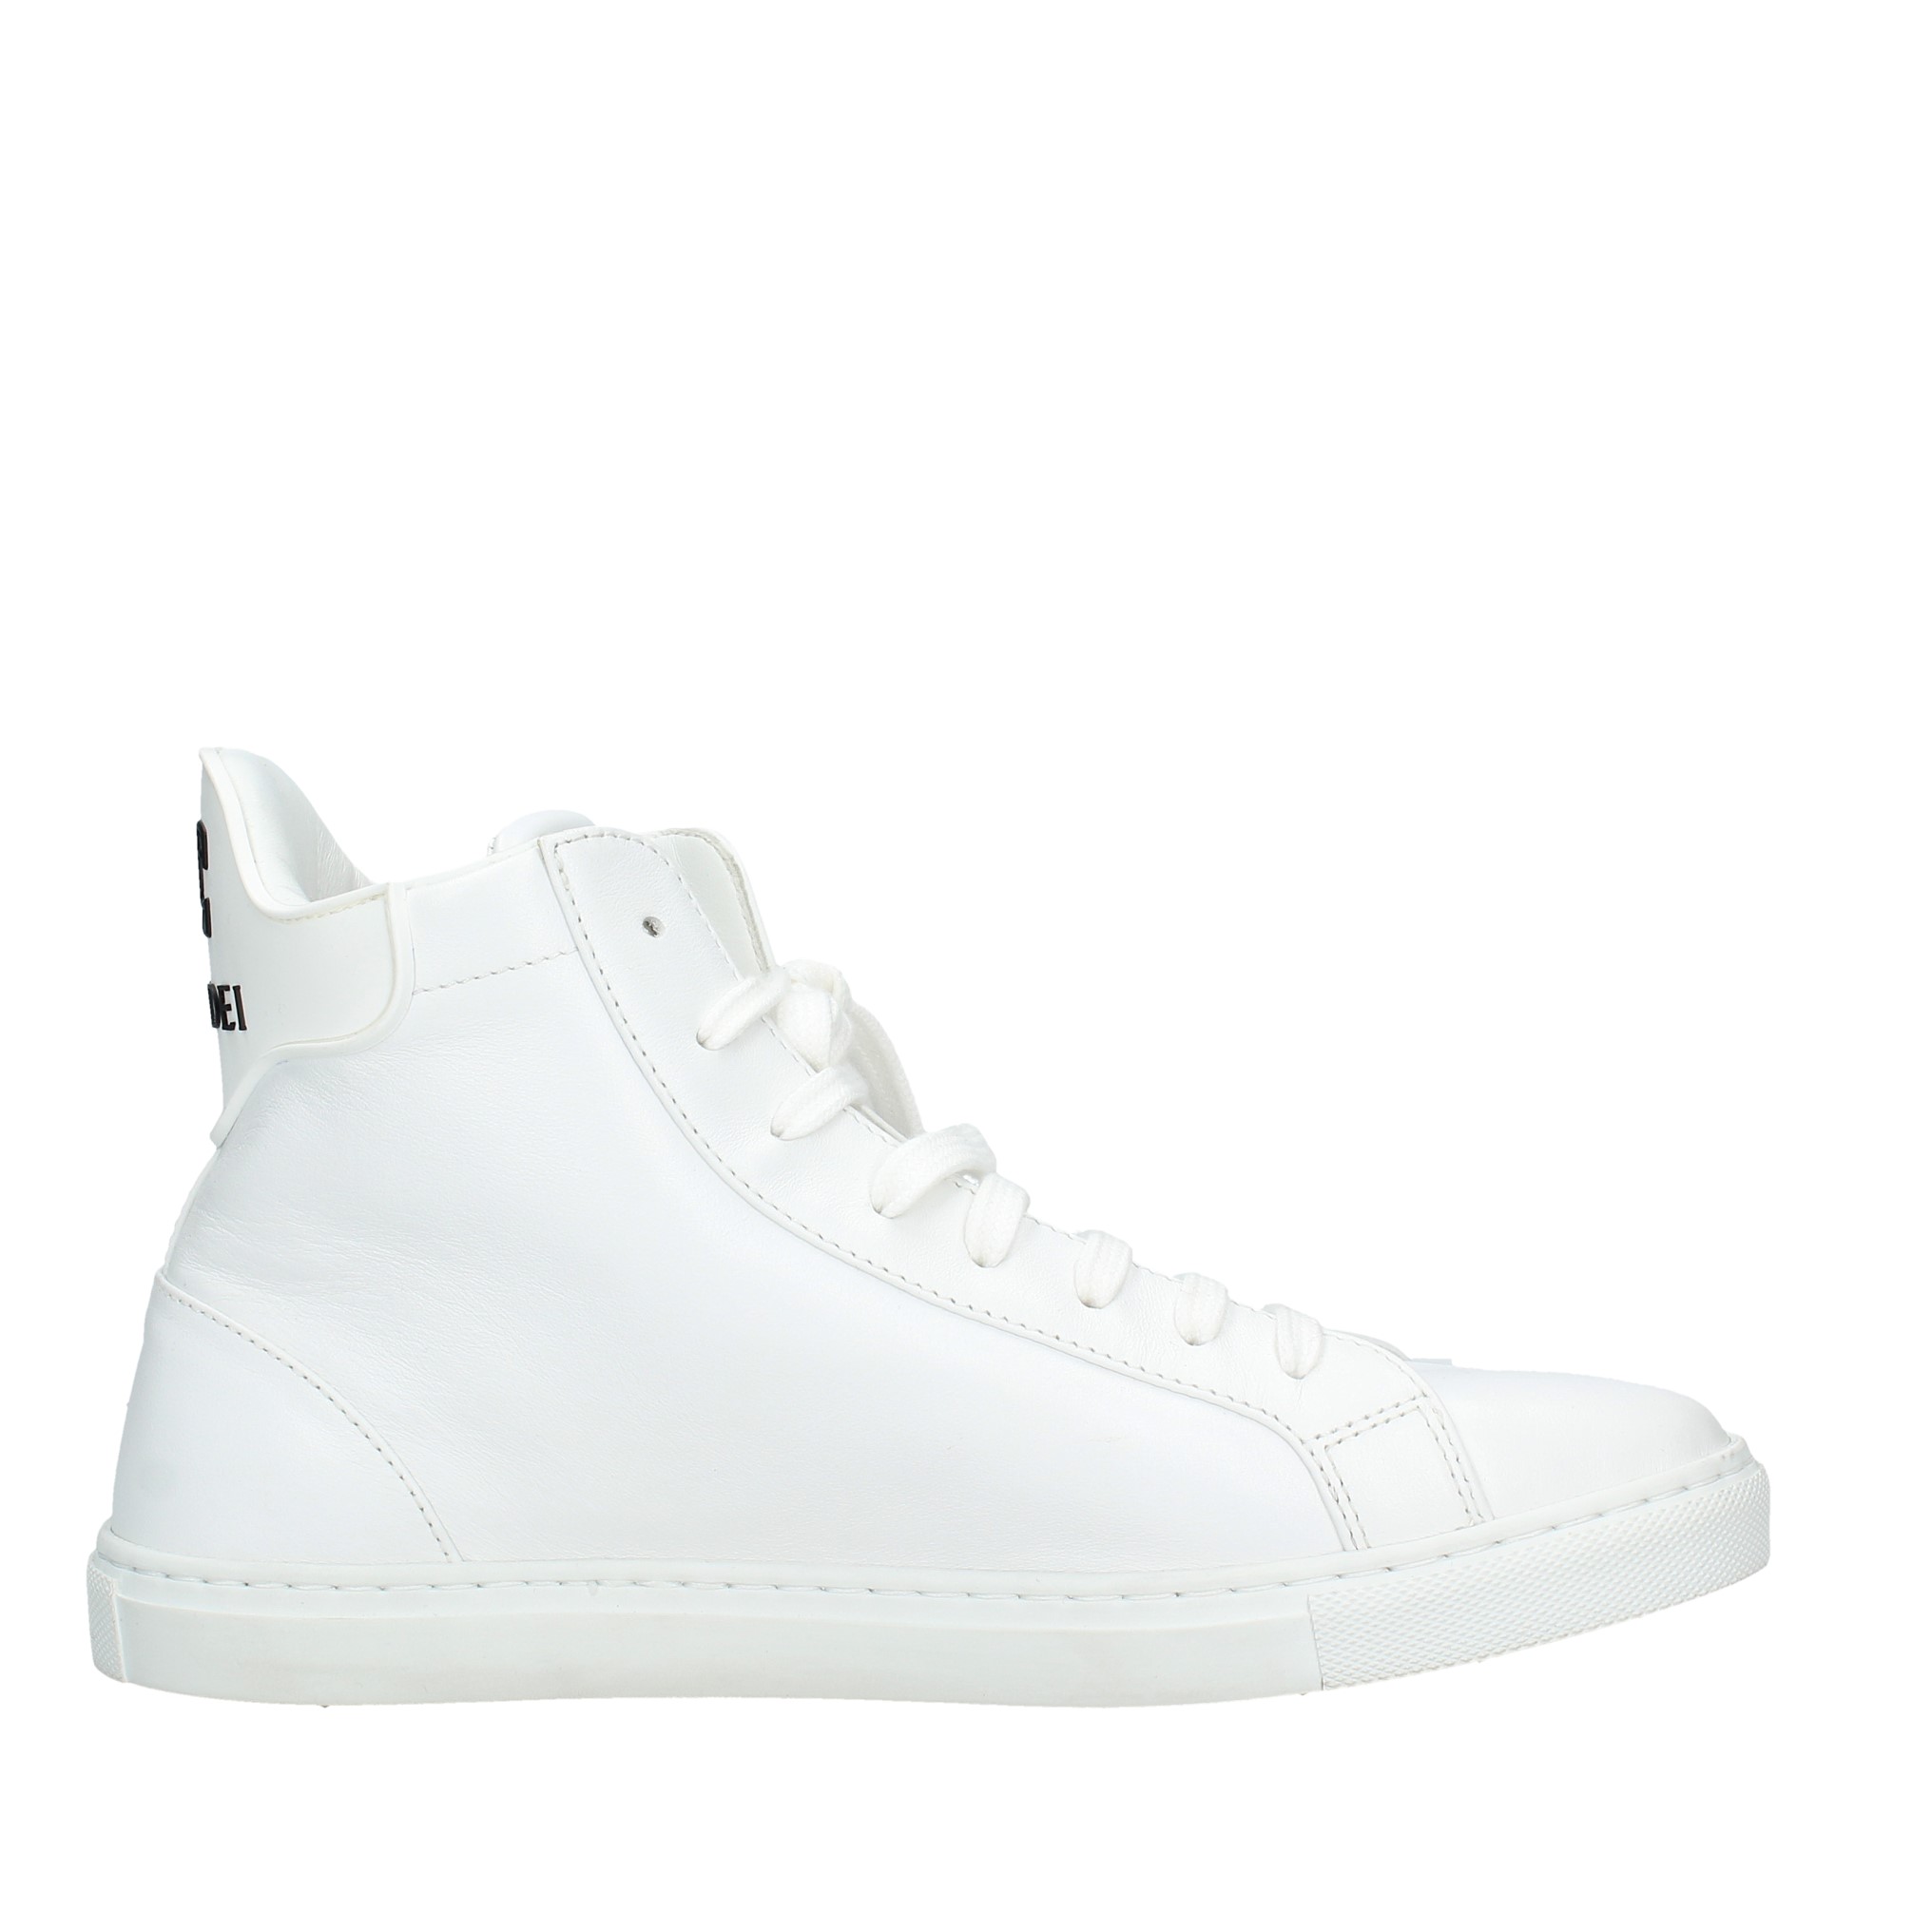 High top sneakers made of leather - CASADEI - Ginevra calzature